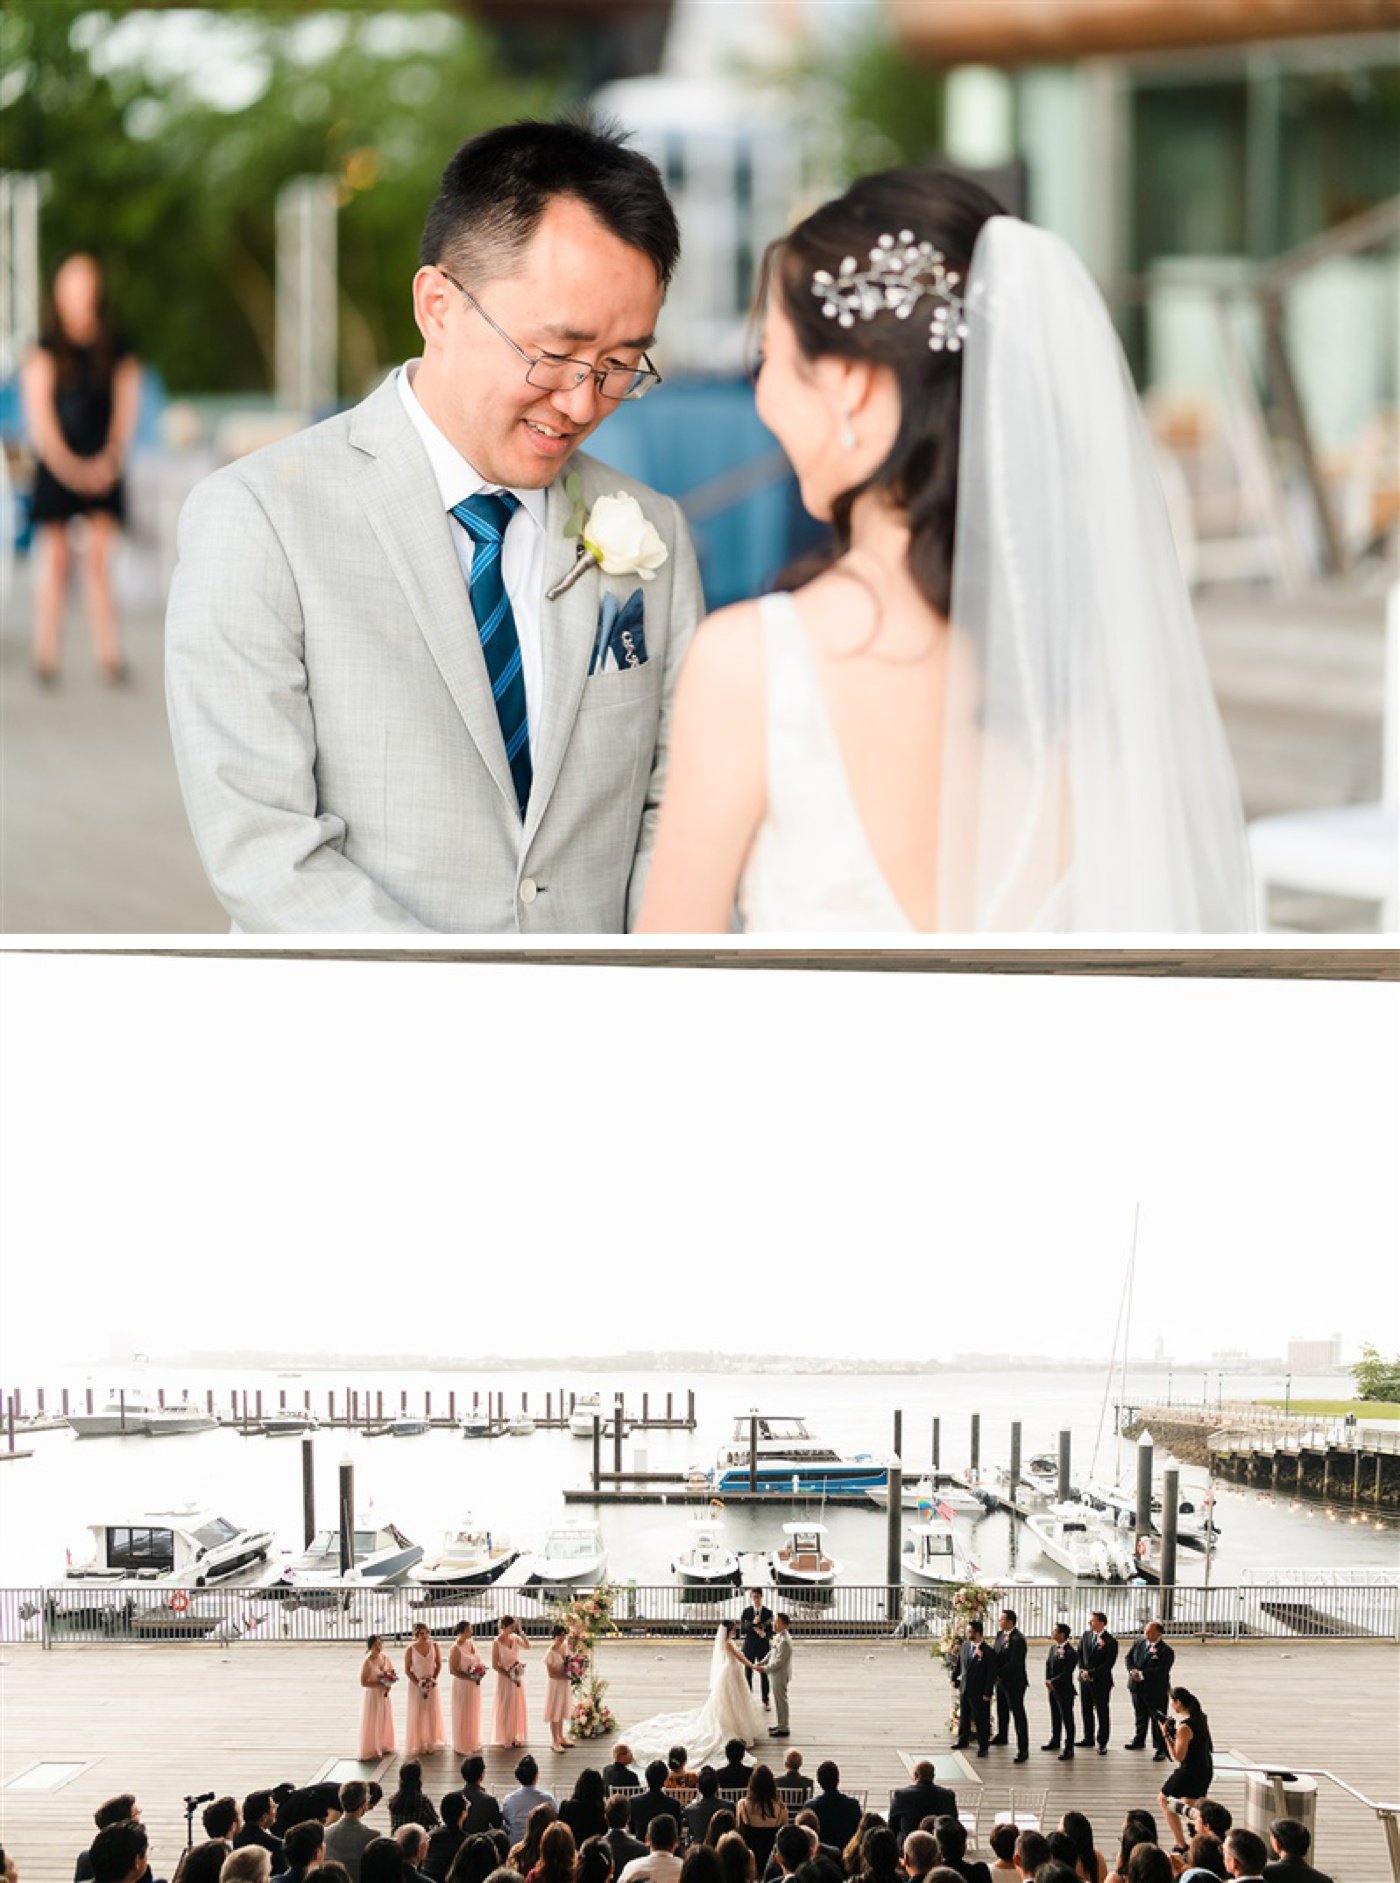 Wedding ceremony on the Grand Plaza at the Institute of Contemporary Art Boston